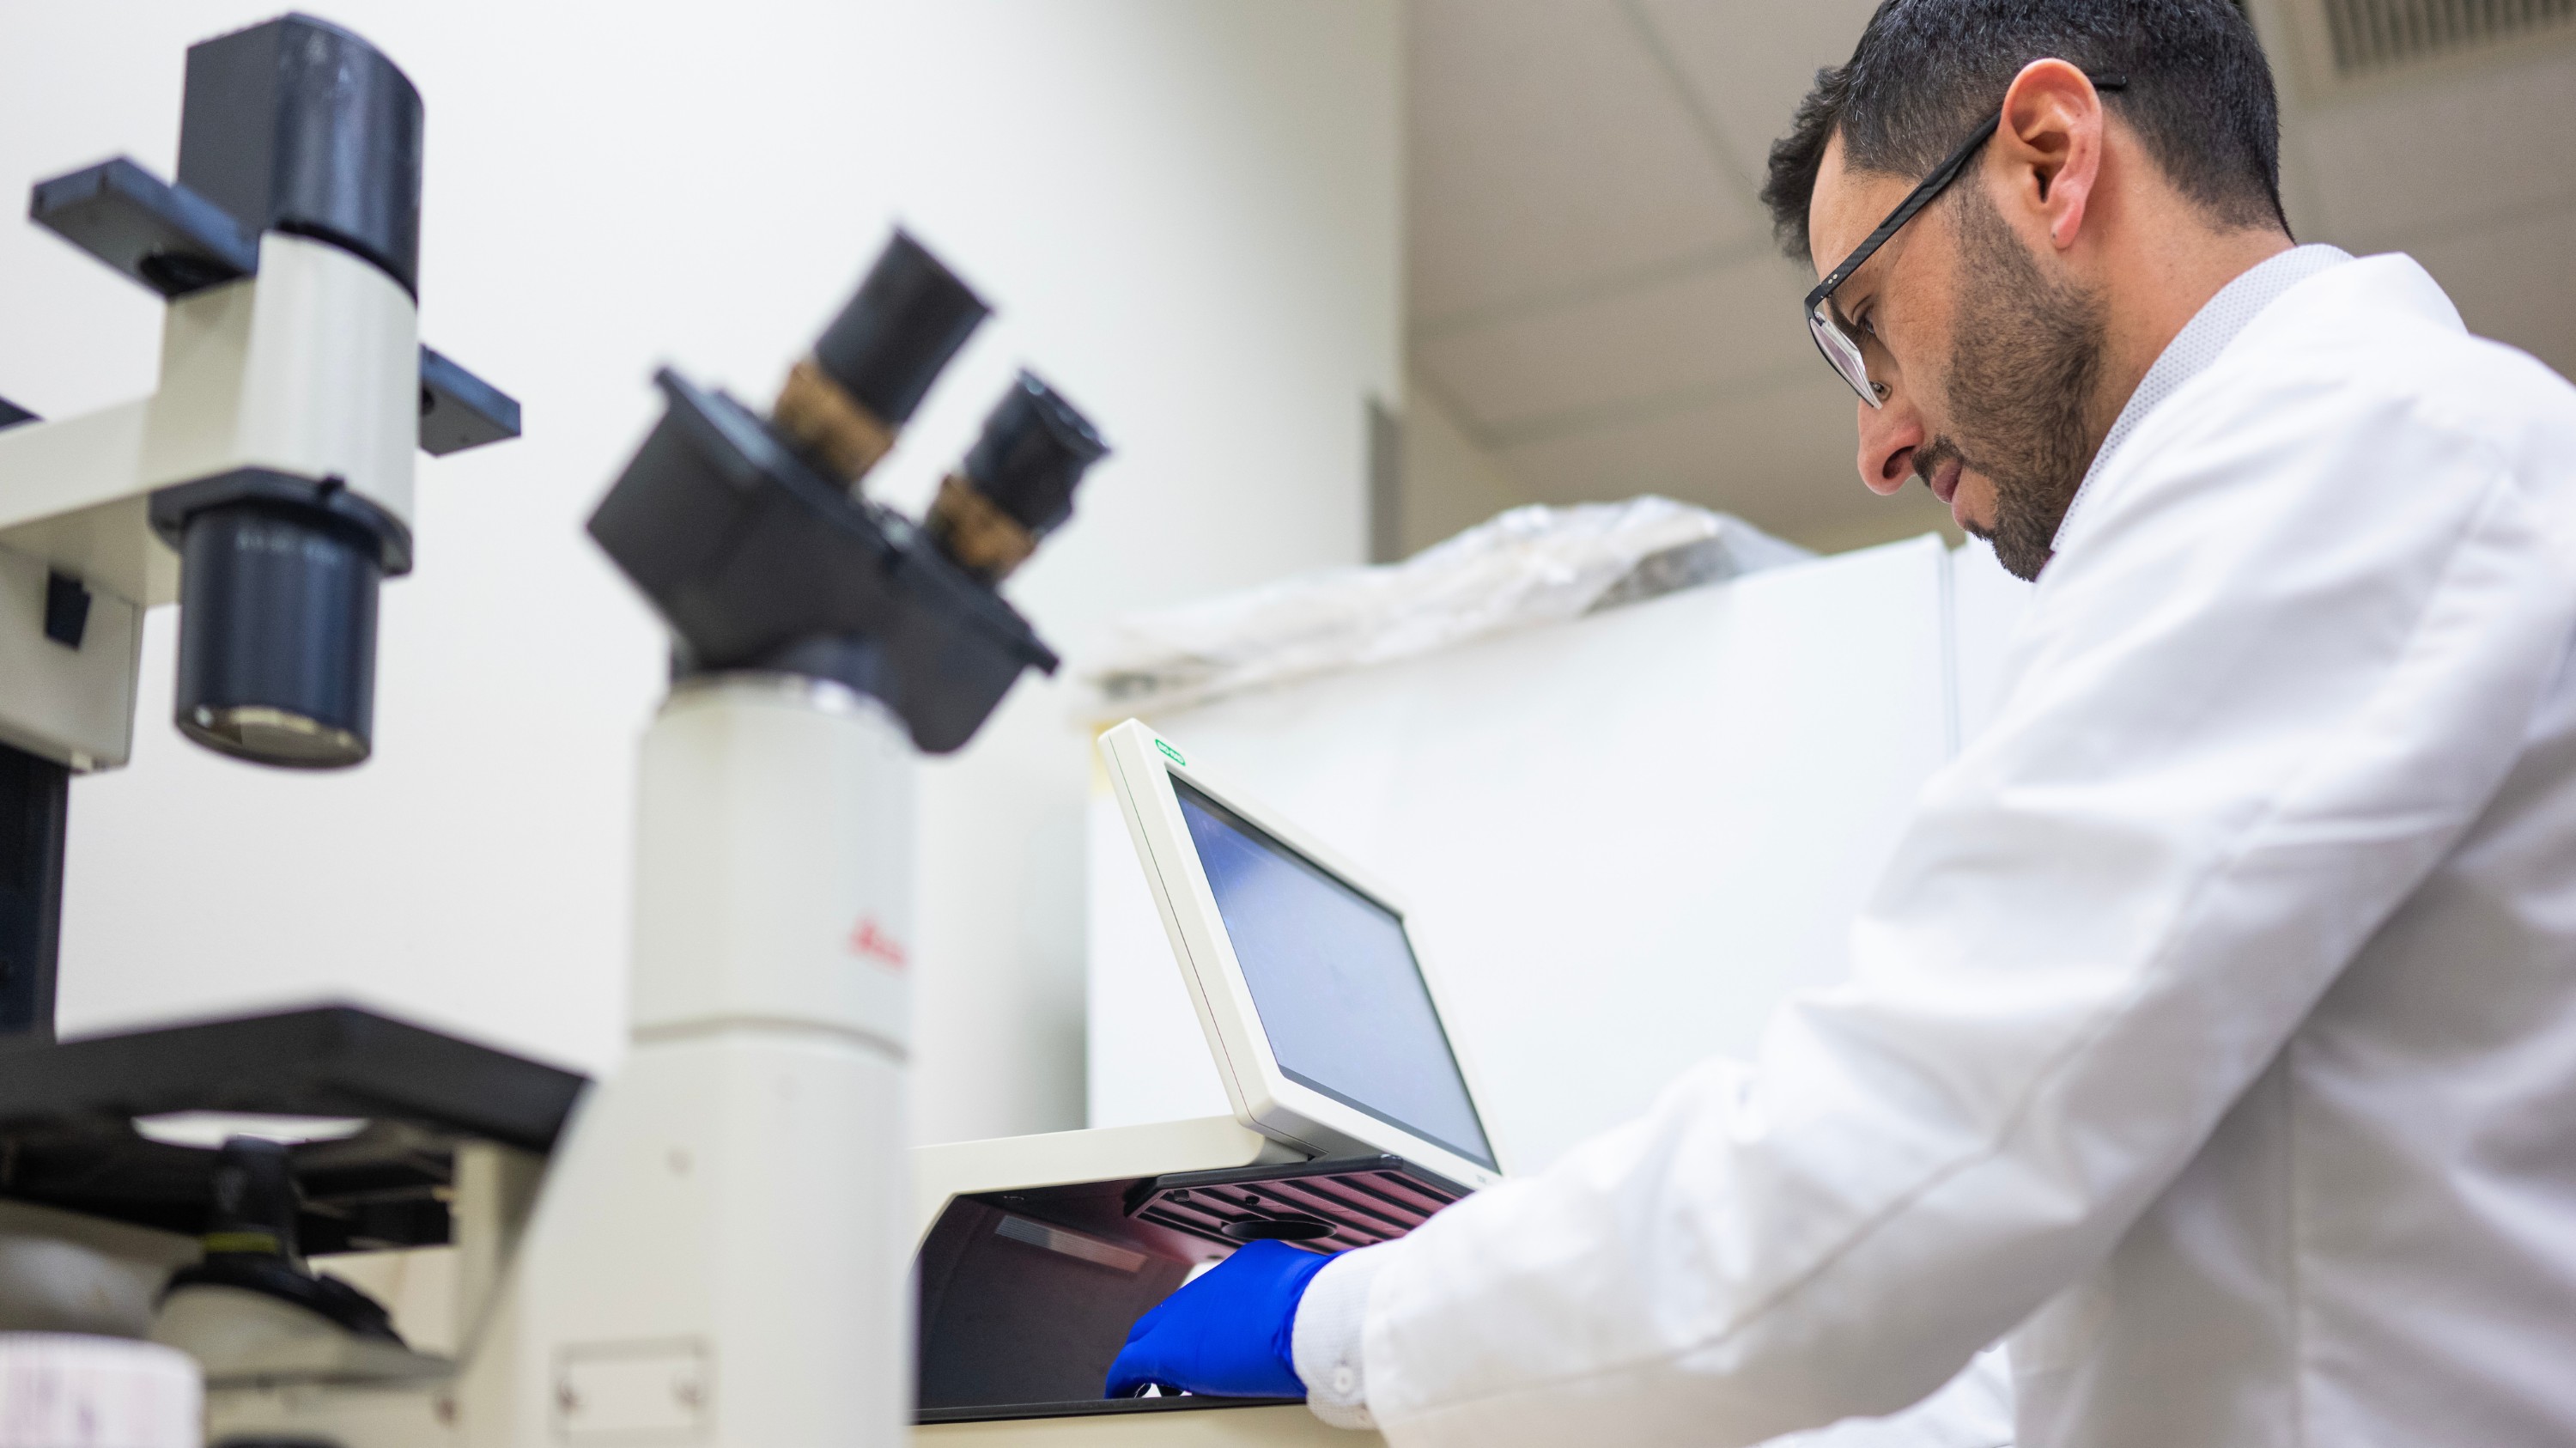 Doctoral student Yasser Tabana examines a sample through a microscope in the laboratory.  (Photo: John Ulan)